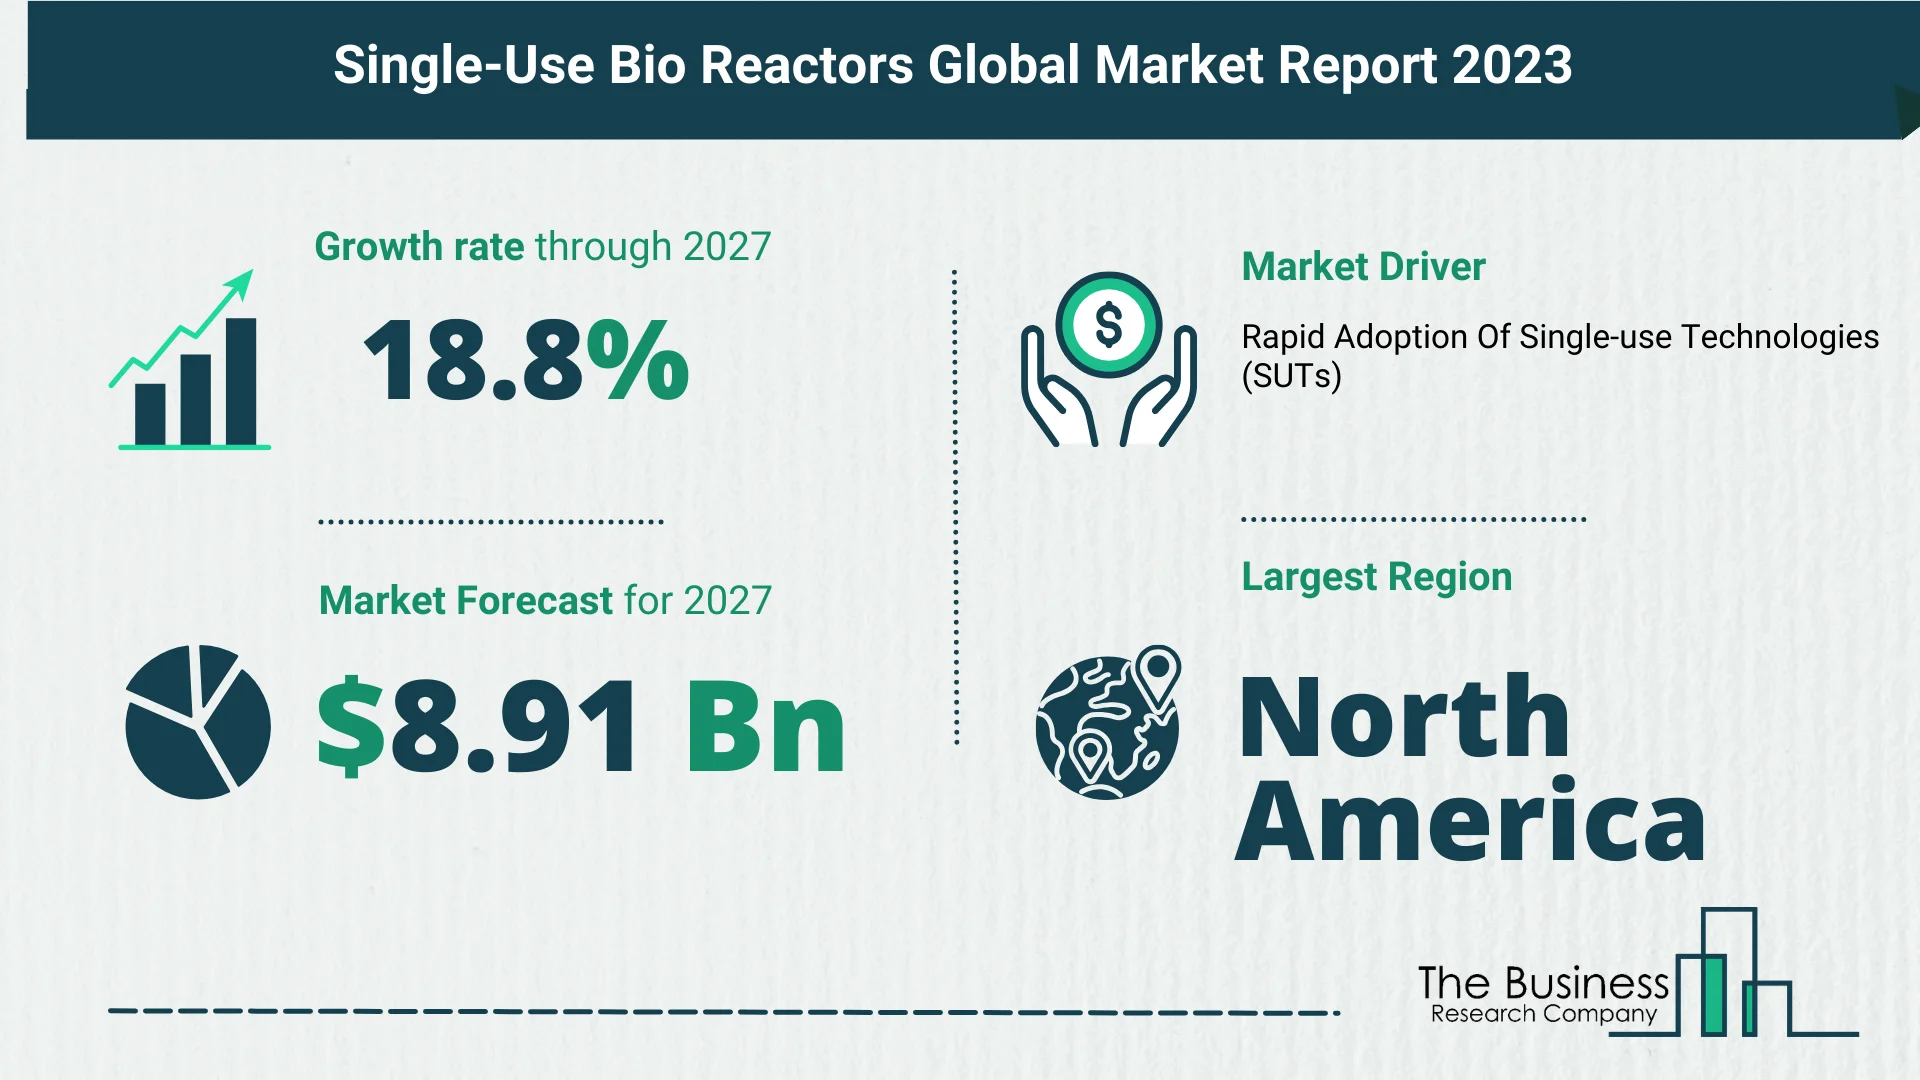 Comprehensive Analysis On Size, Share, And Drivers Of The Single-Use Bio Reactors Market